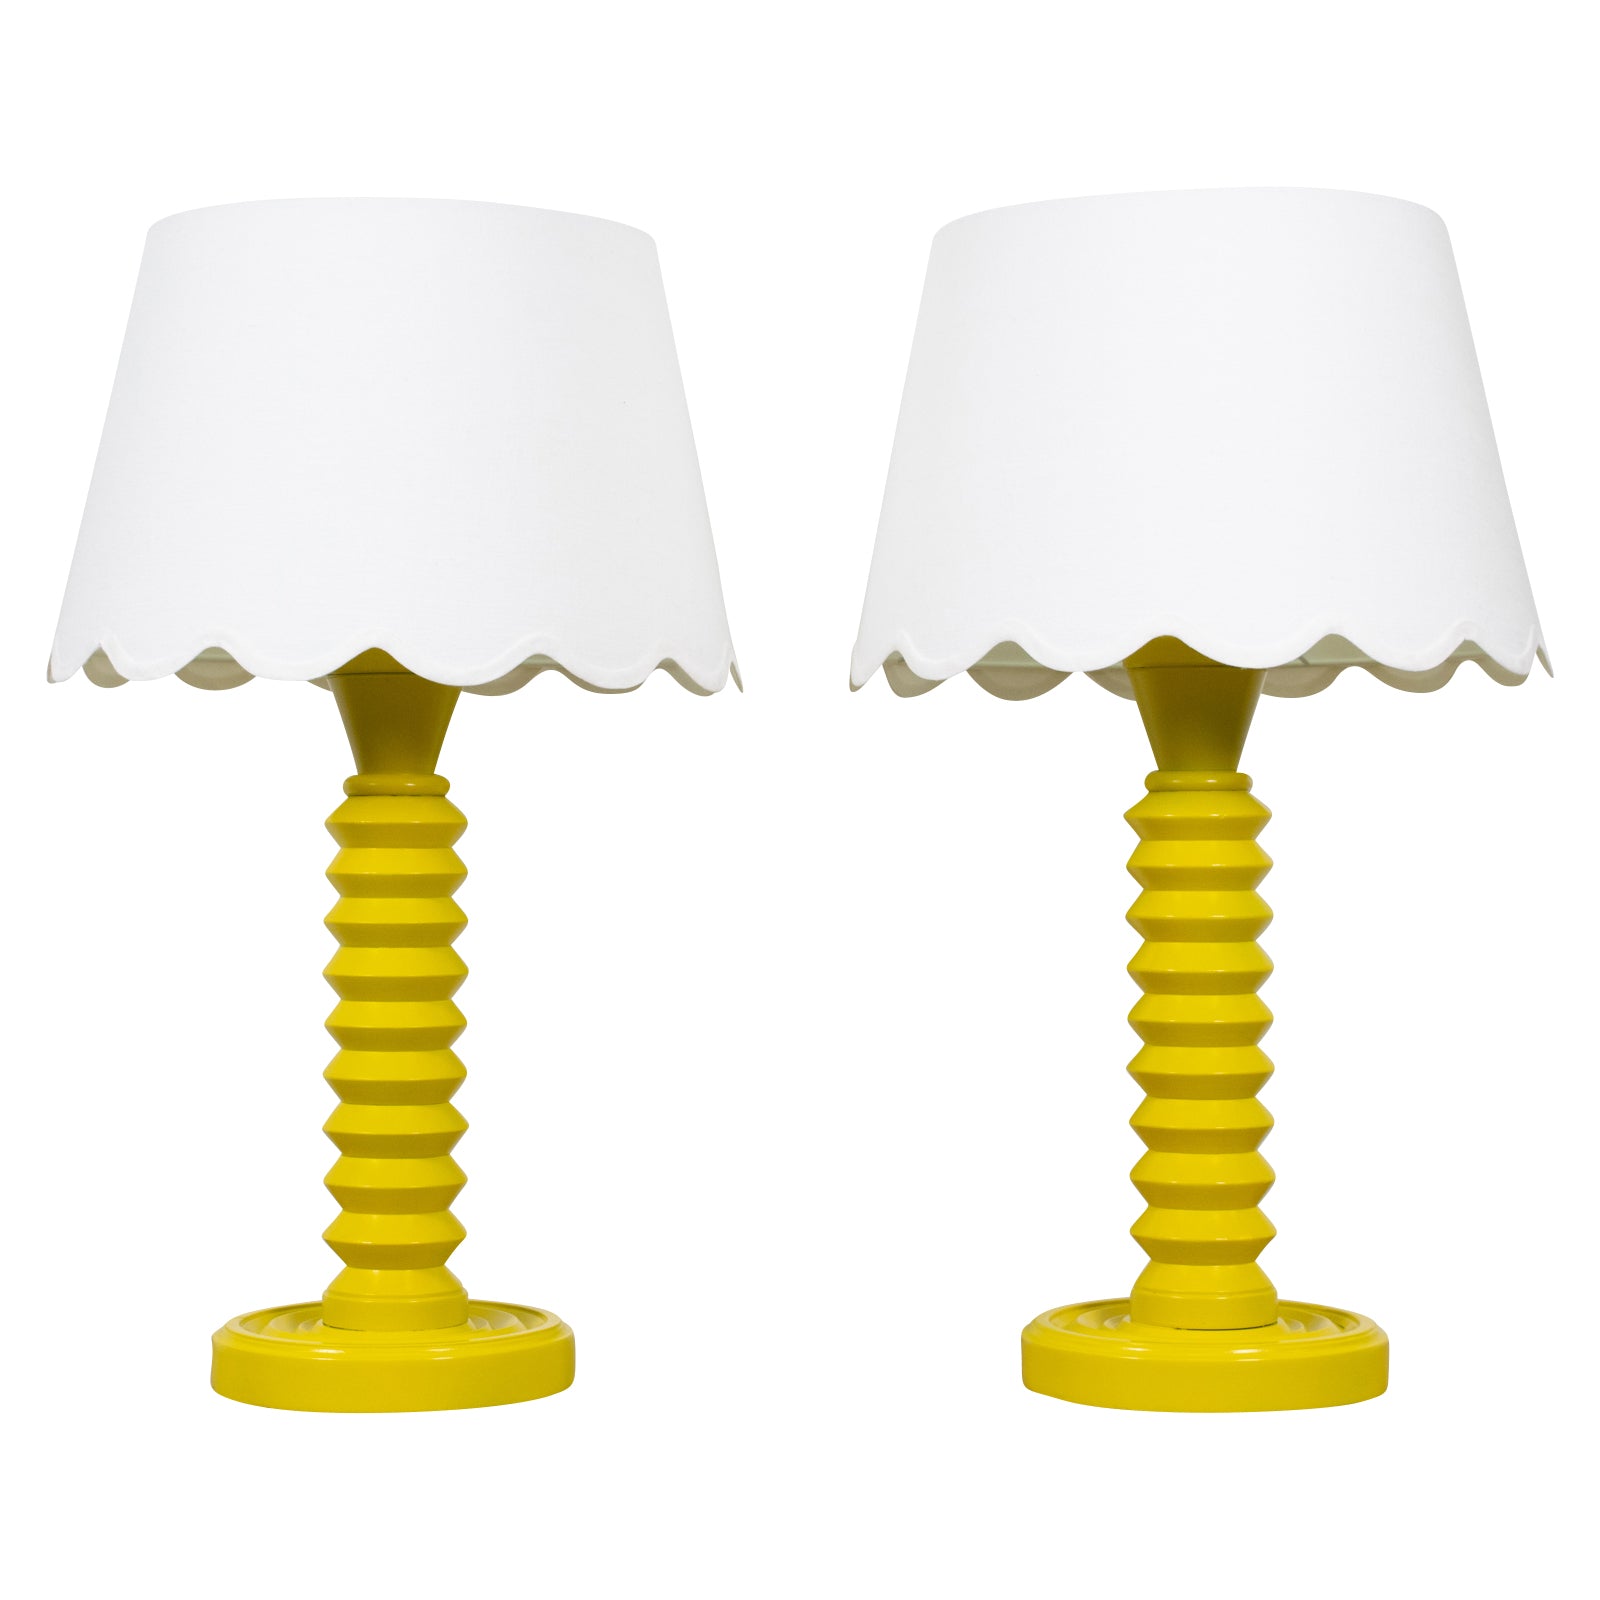 Pair of Yellow 1930s Turned Wooden Lamps